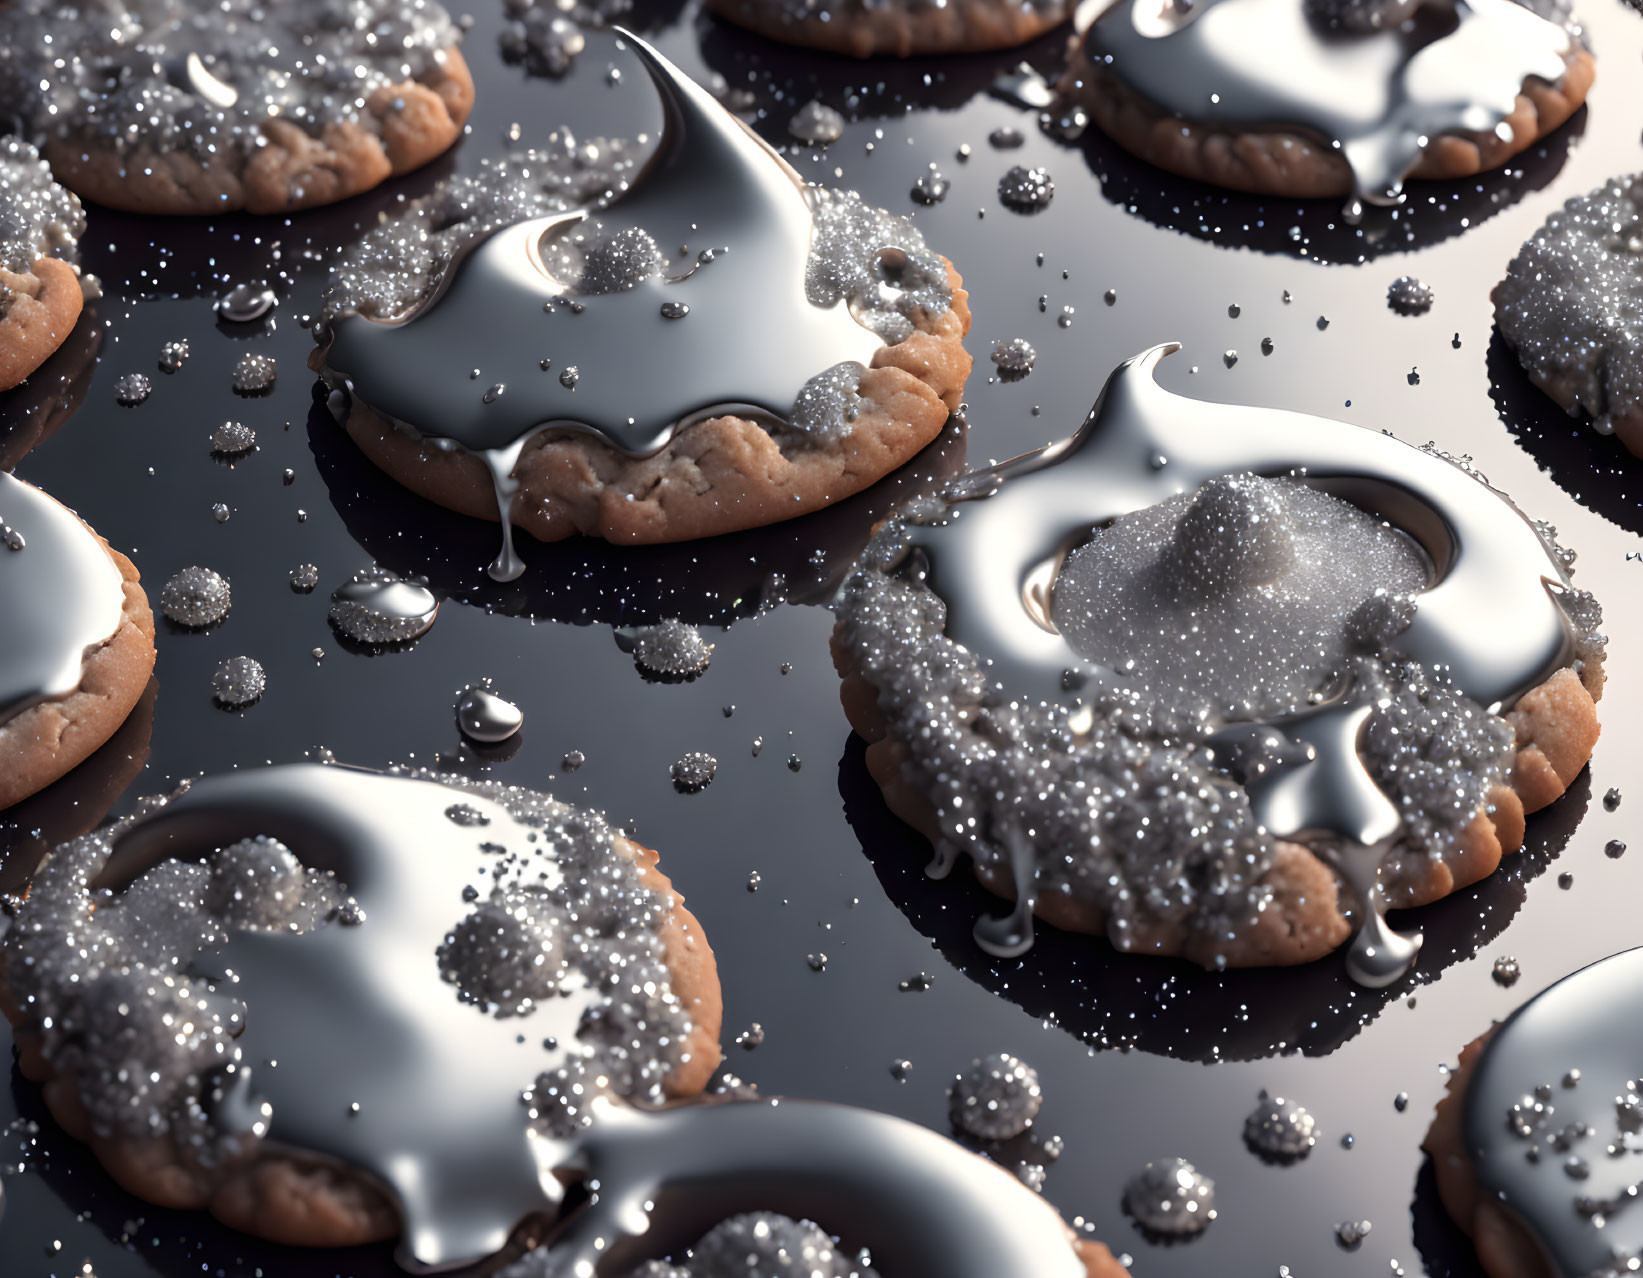 Glossy Iced Cookies with Sparkling Sugar on Black Surface